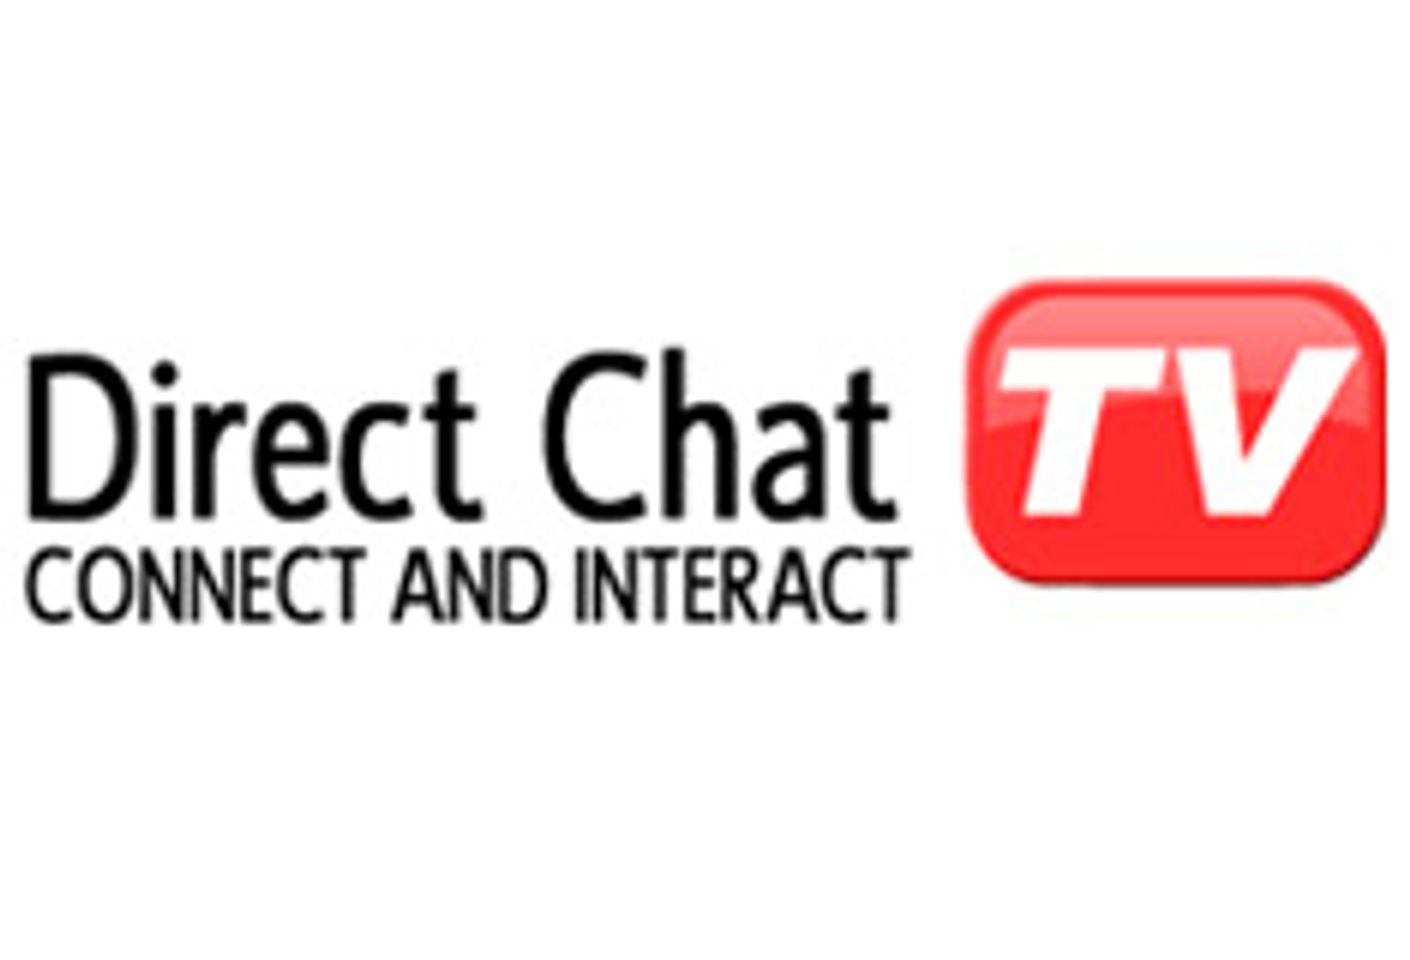 DirectChat.TV to Celebrate Second Anniversary Online with Industry Party